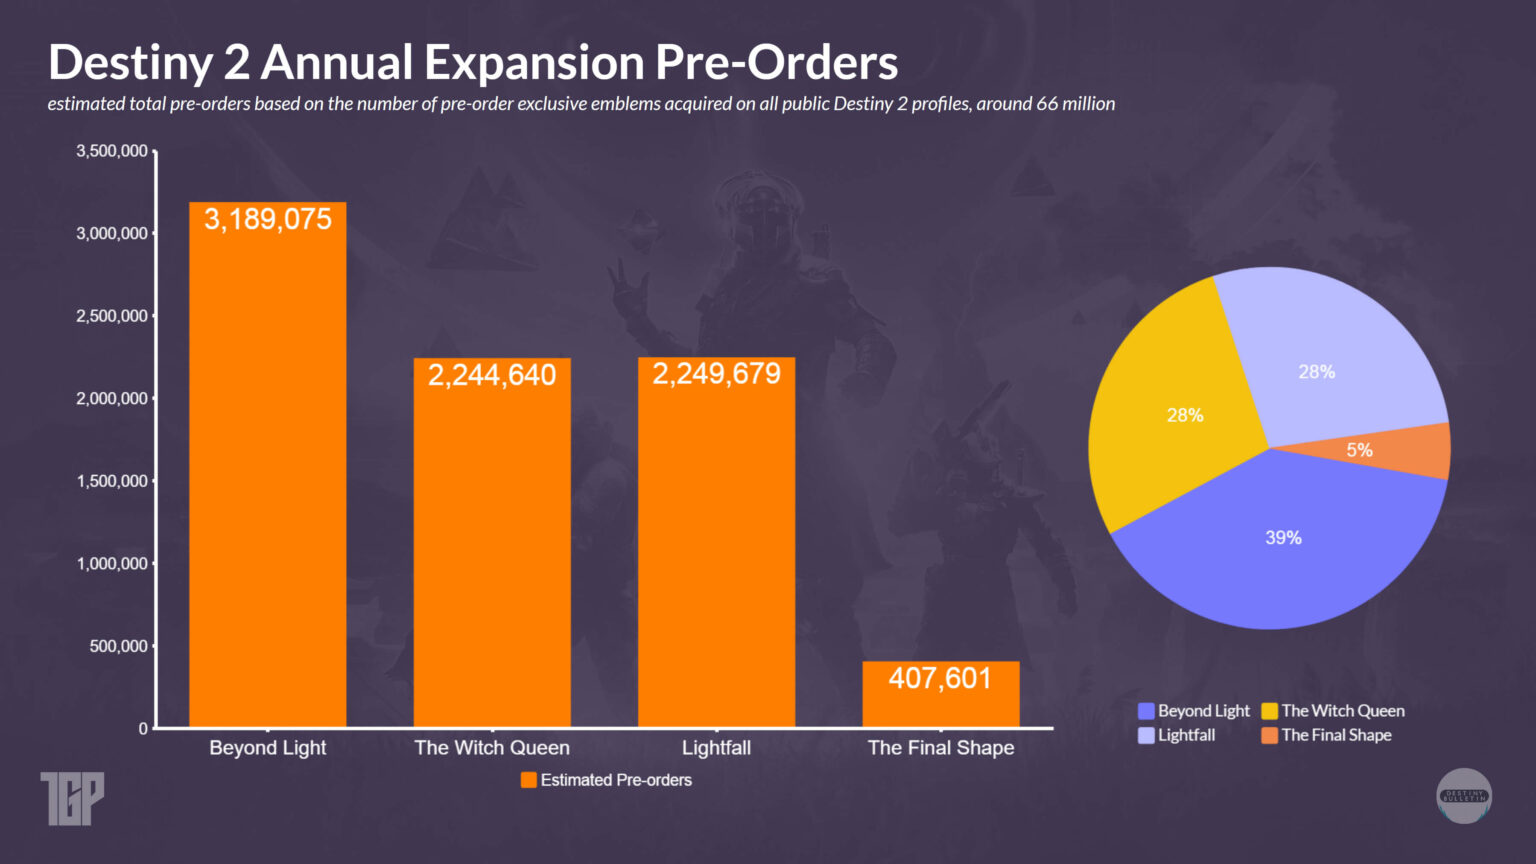 A graph that shows The Final Shape's concerningly low pre-order numbers in comparison to the other expansions.